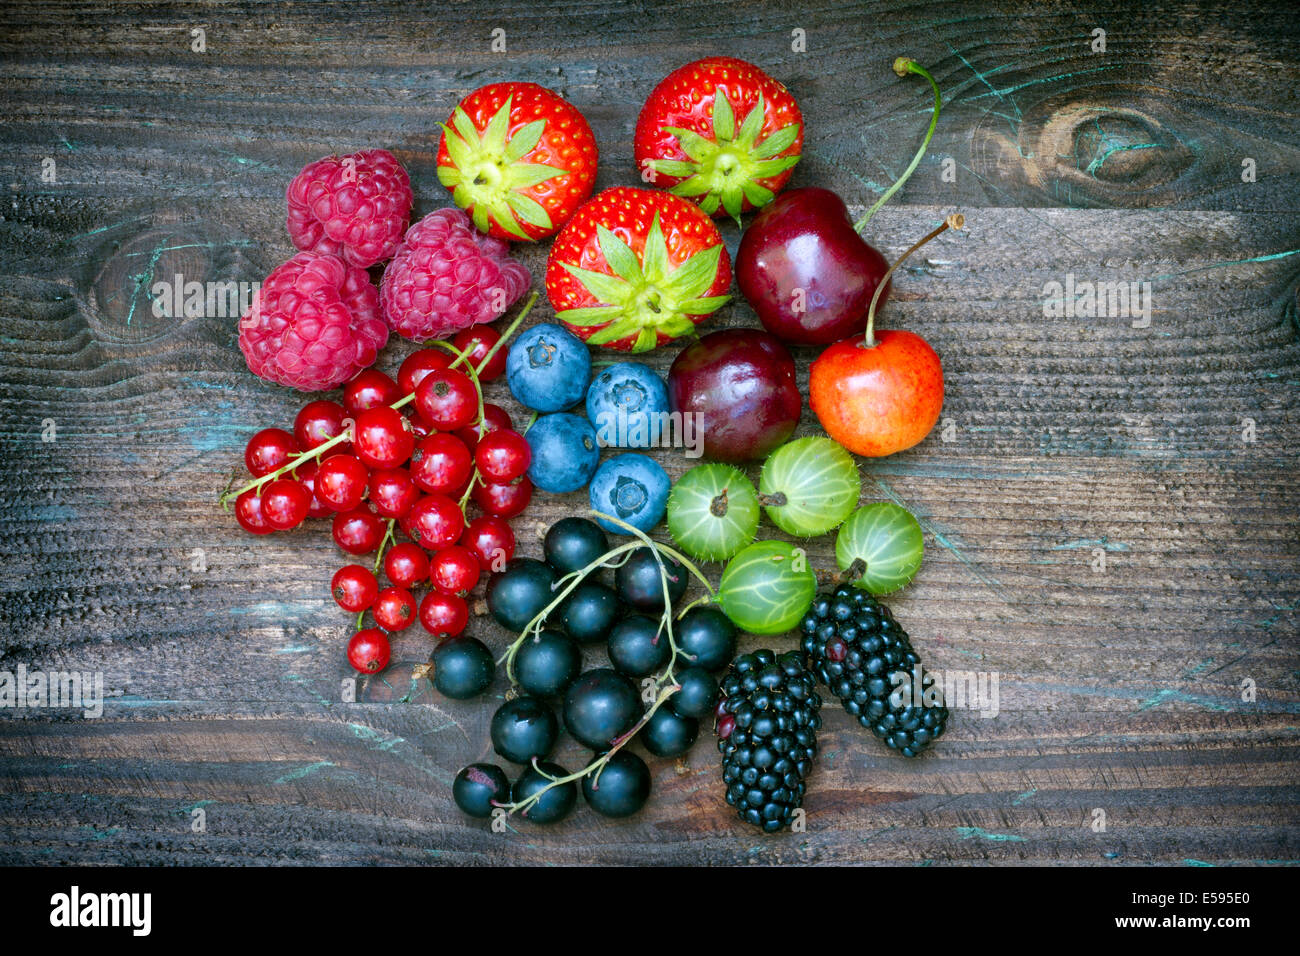 Summer wild berry fruits on vintage board still life concept Stock Photo